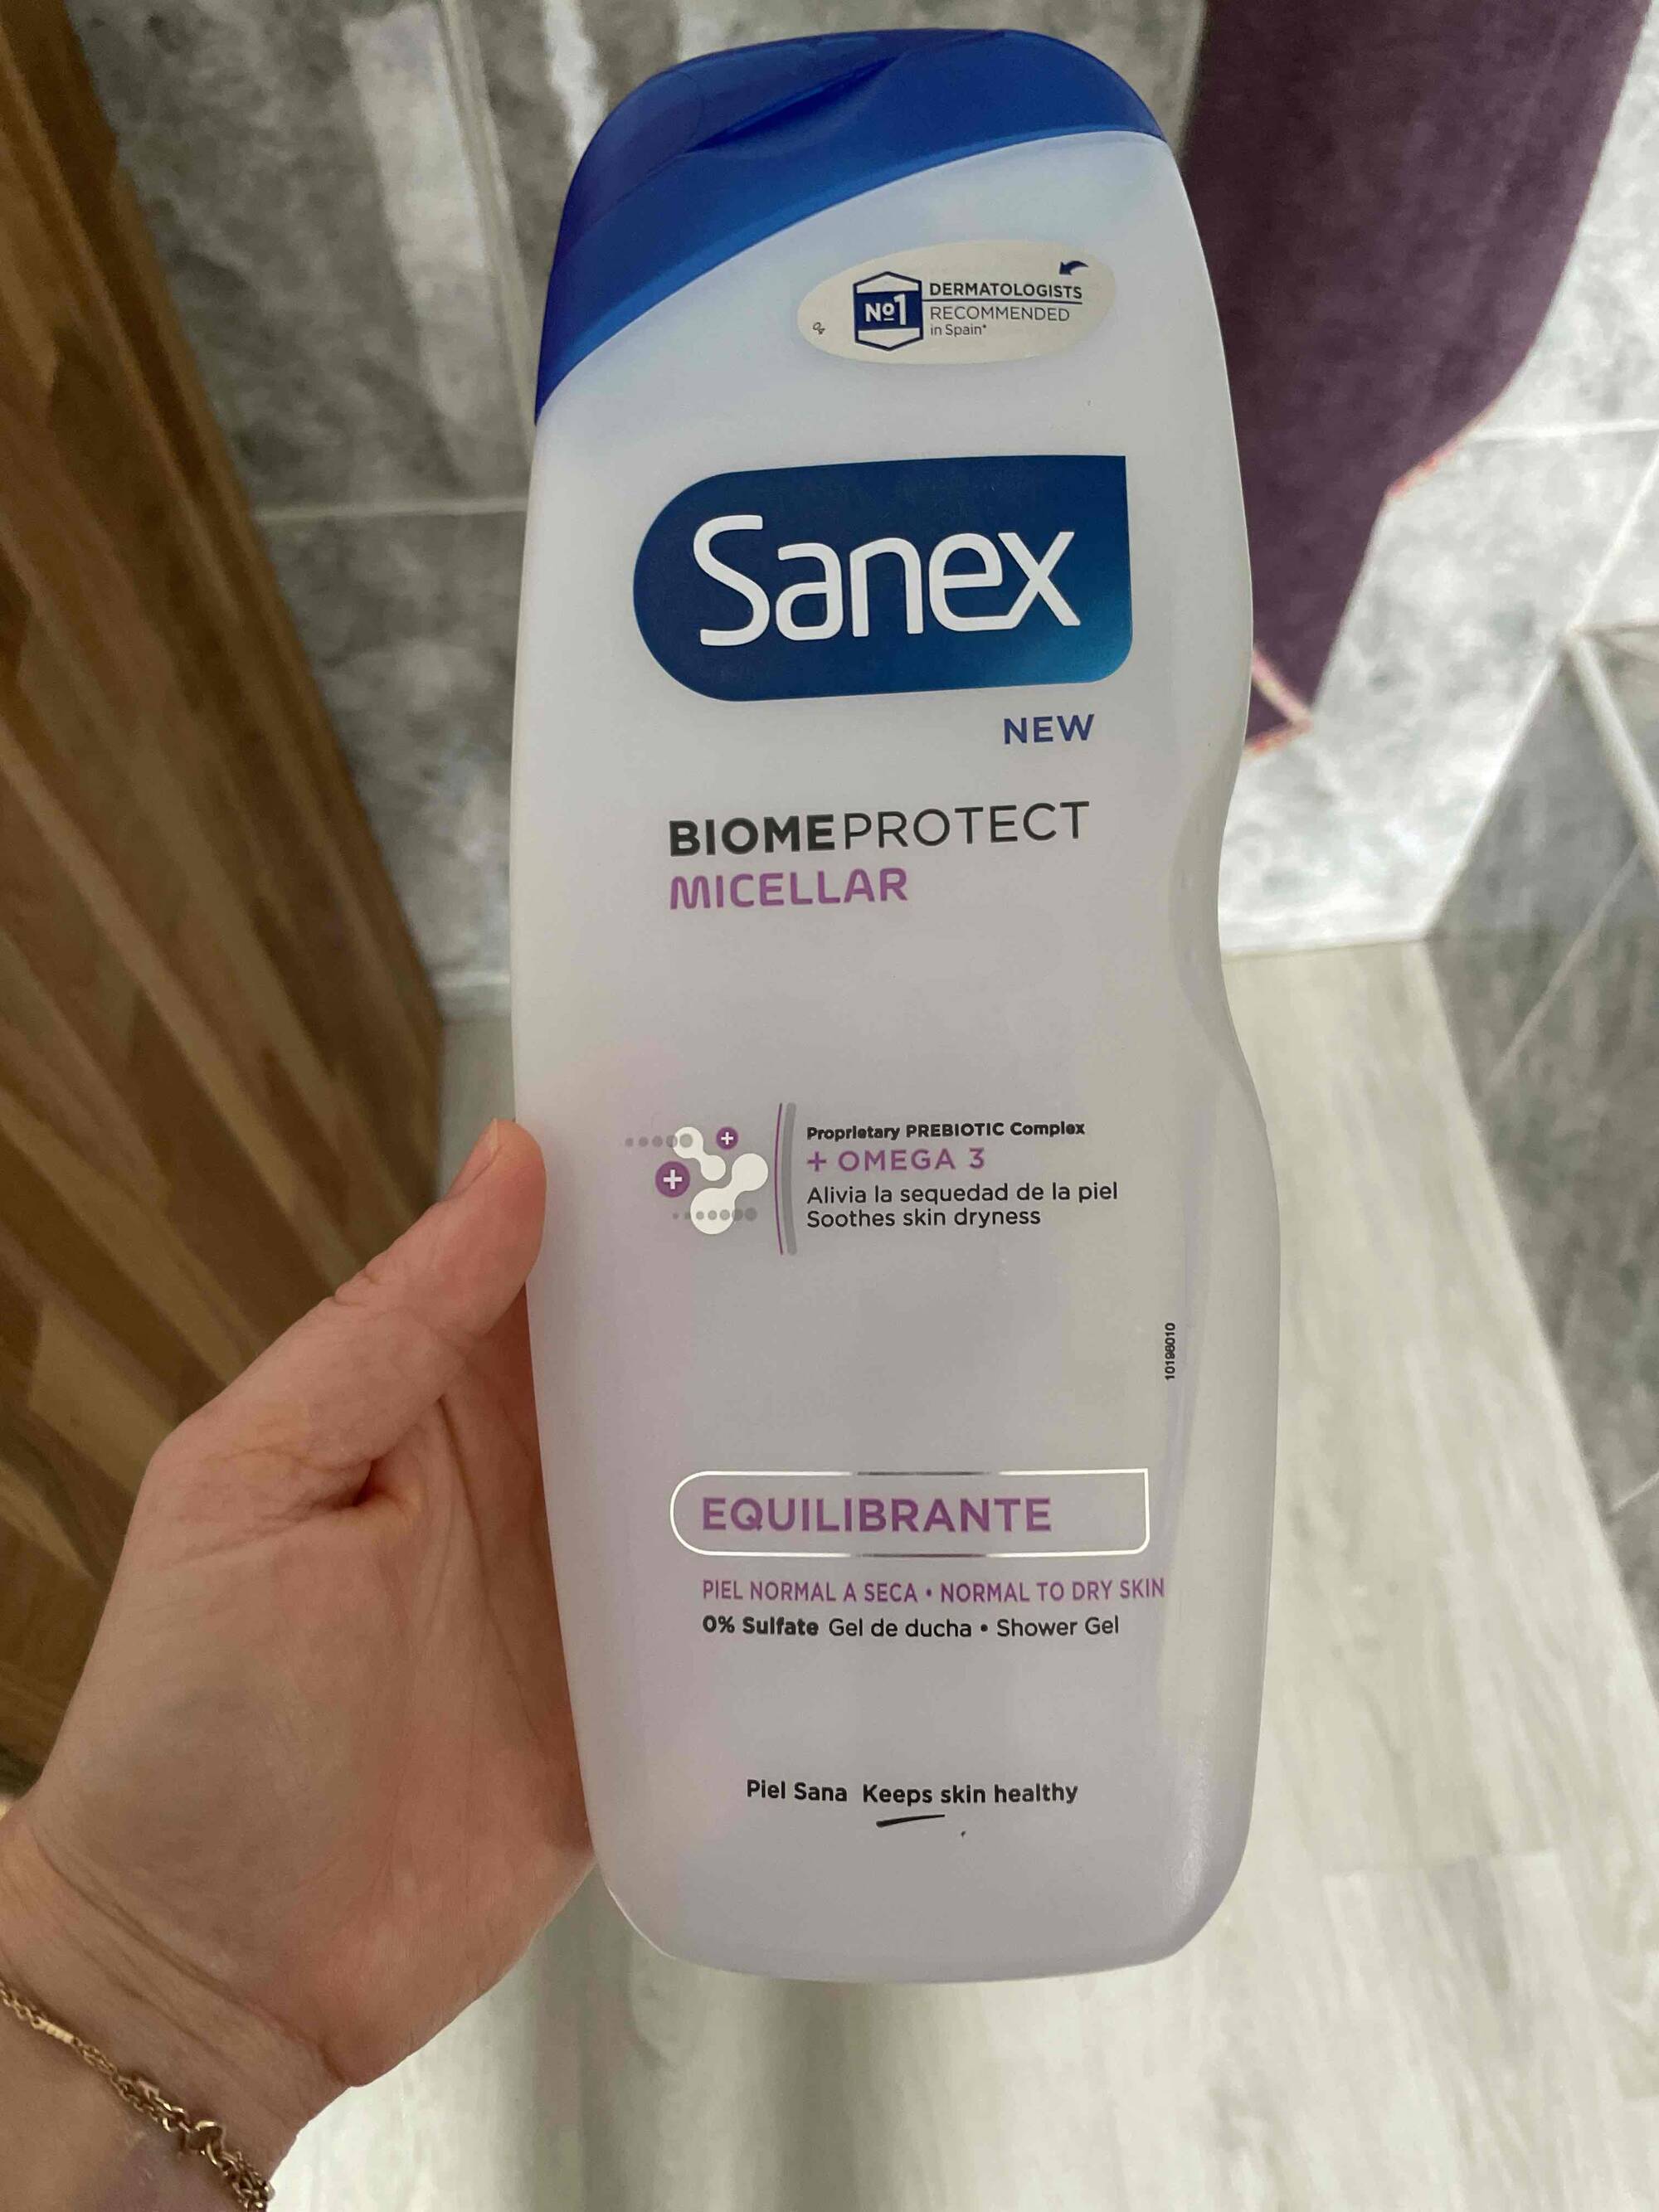 SANEX - Biomeprotect micellar - Equilibrante shower gel